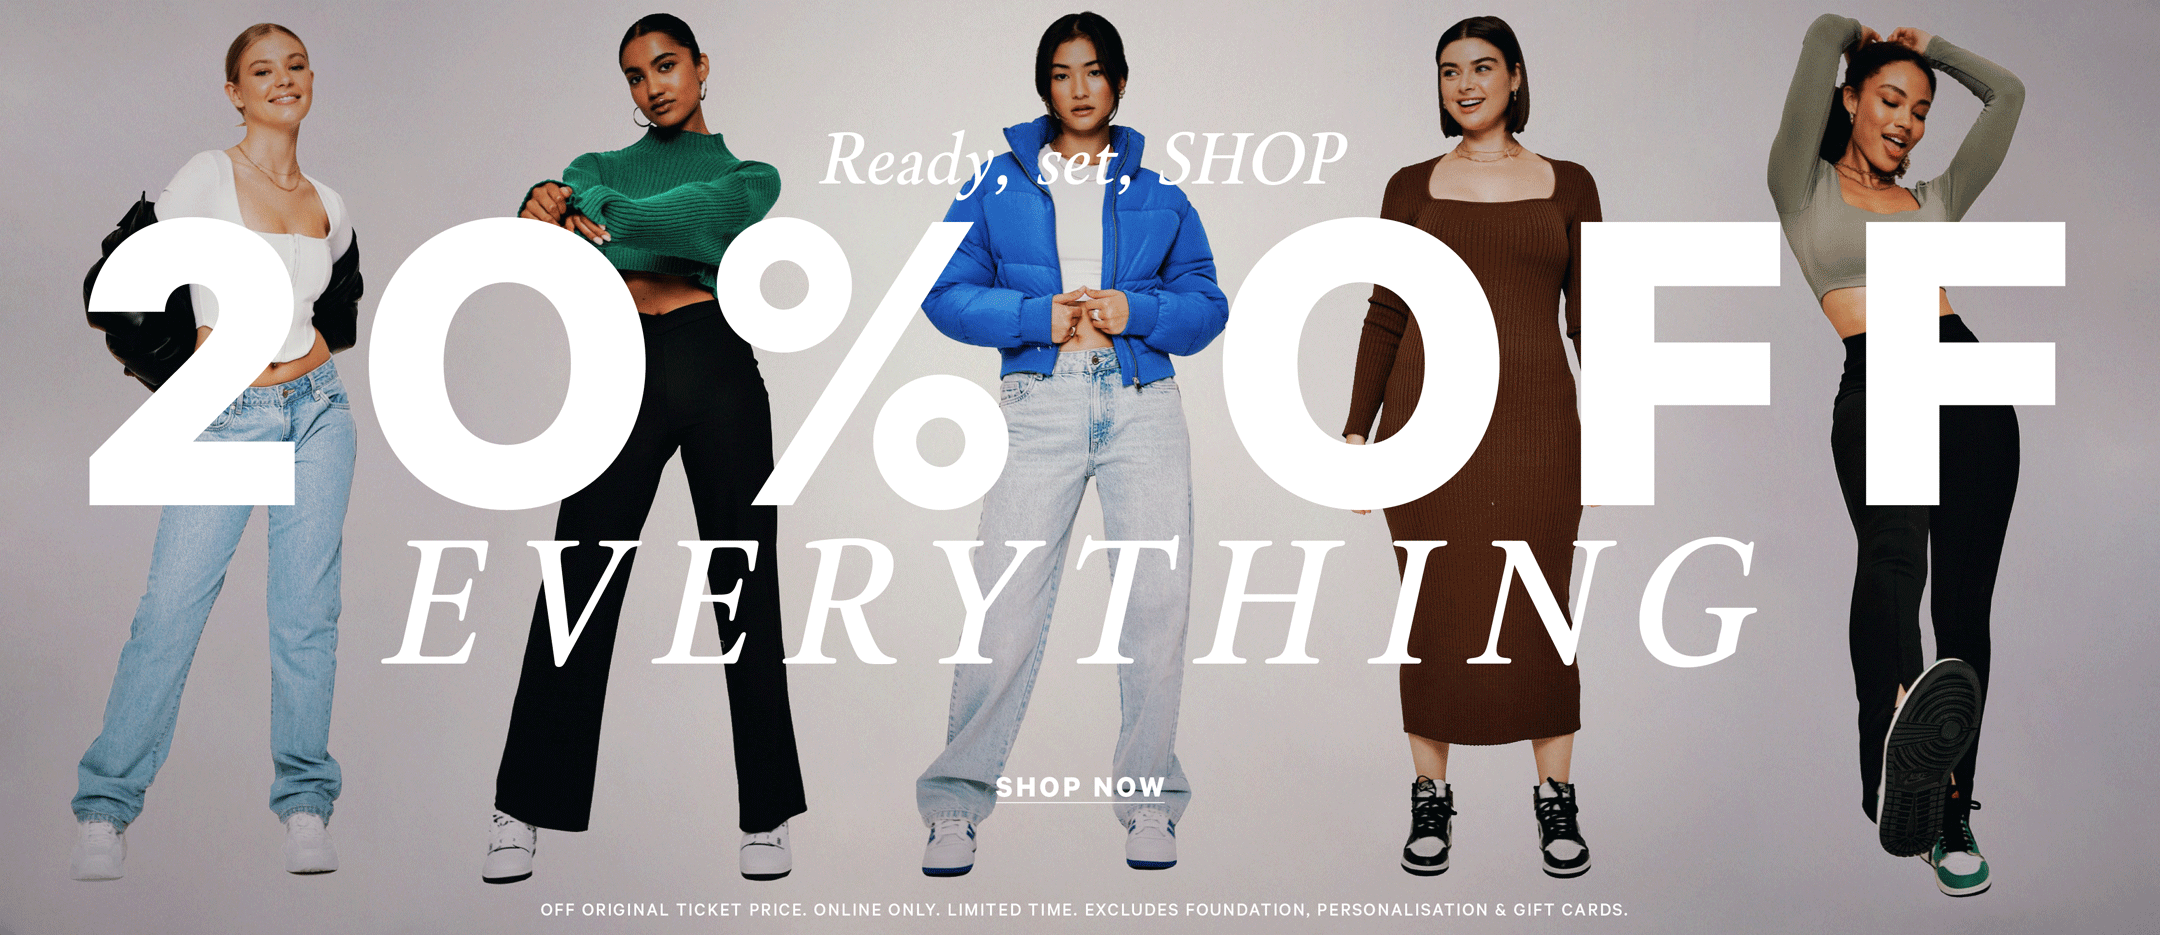 Supre 20% OFF on everything including outerwear, denim, swimwear & more